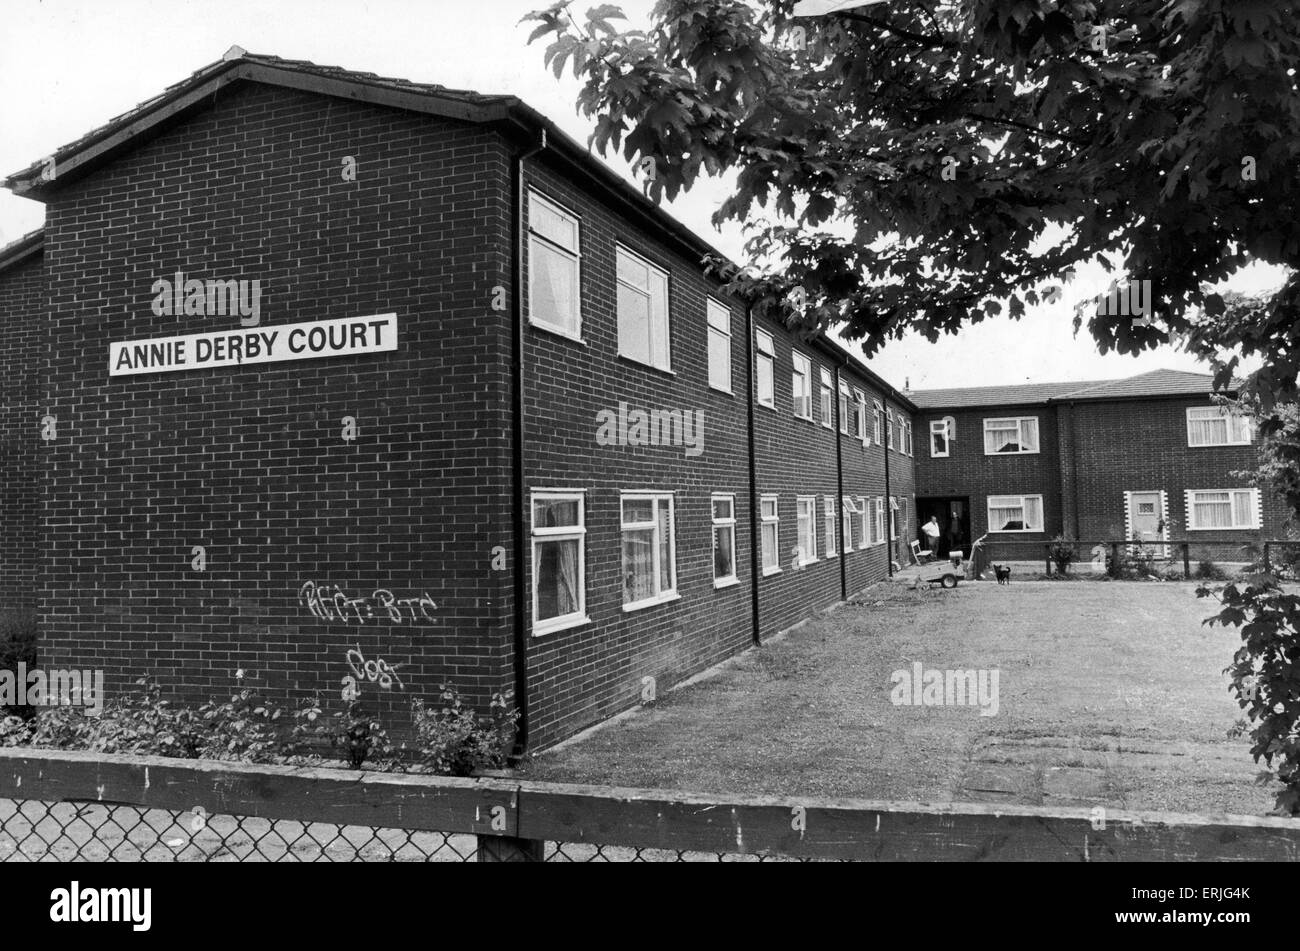 Annie Derby Court in Harpurhey, Manchester. Staff at this Council run sheltered housing block have threatened to strike, unless three tenants at the centre of vice and violence allegations are removied in 48 hours. 1st June 1989. Stock Photo